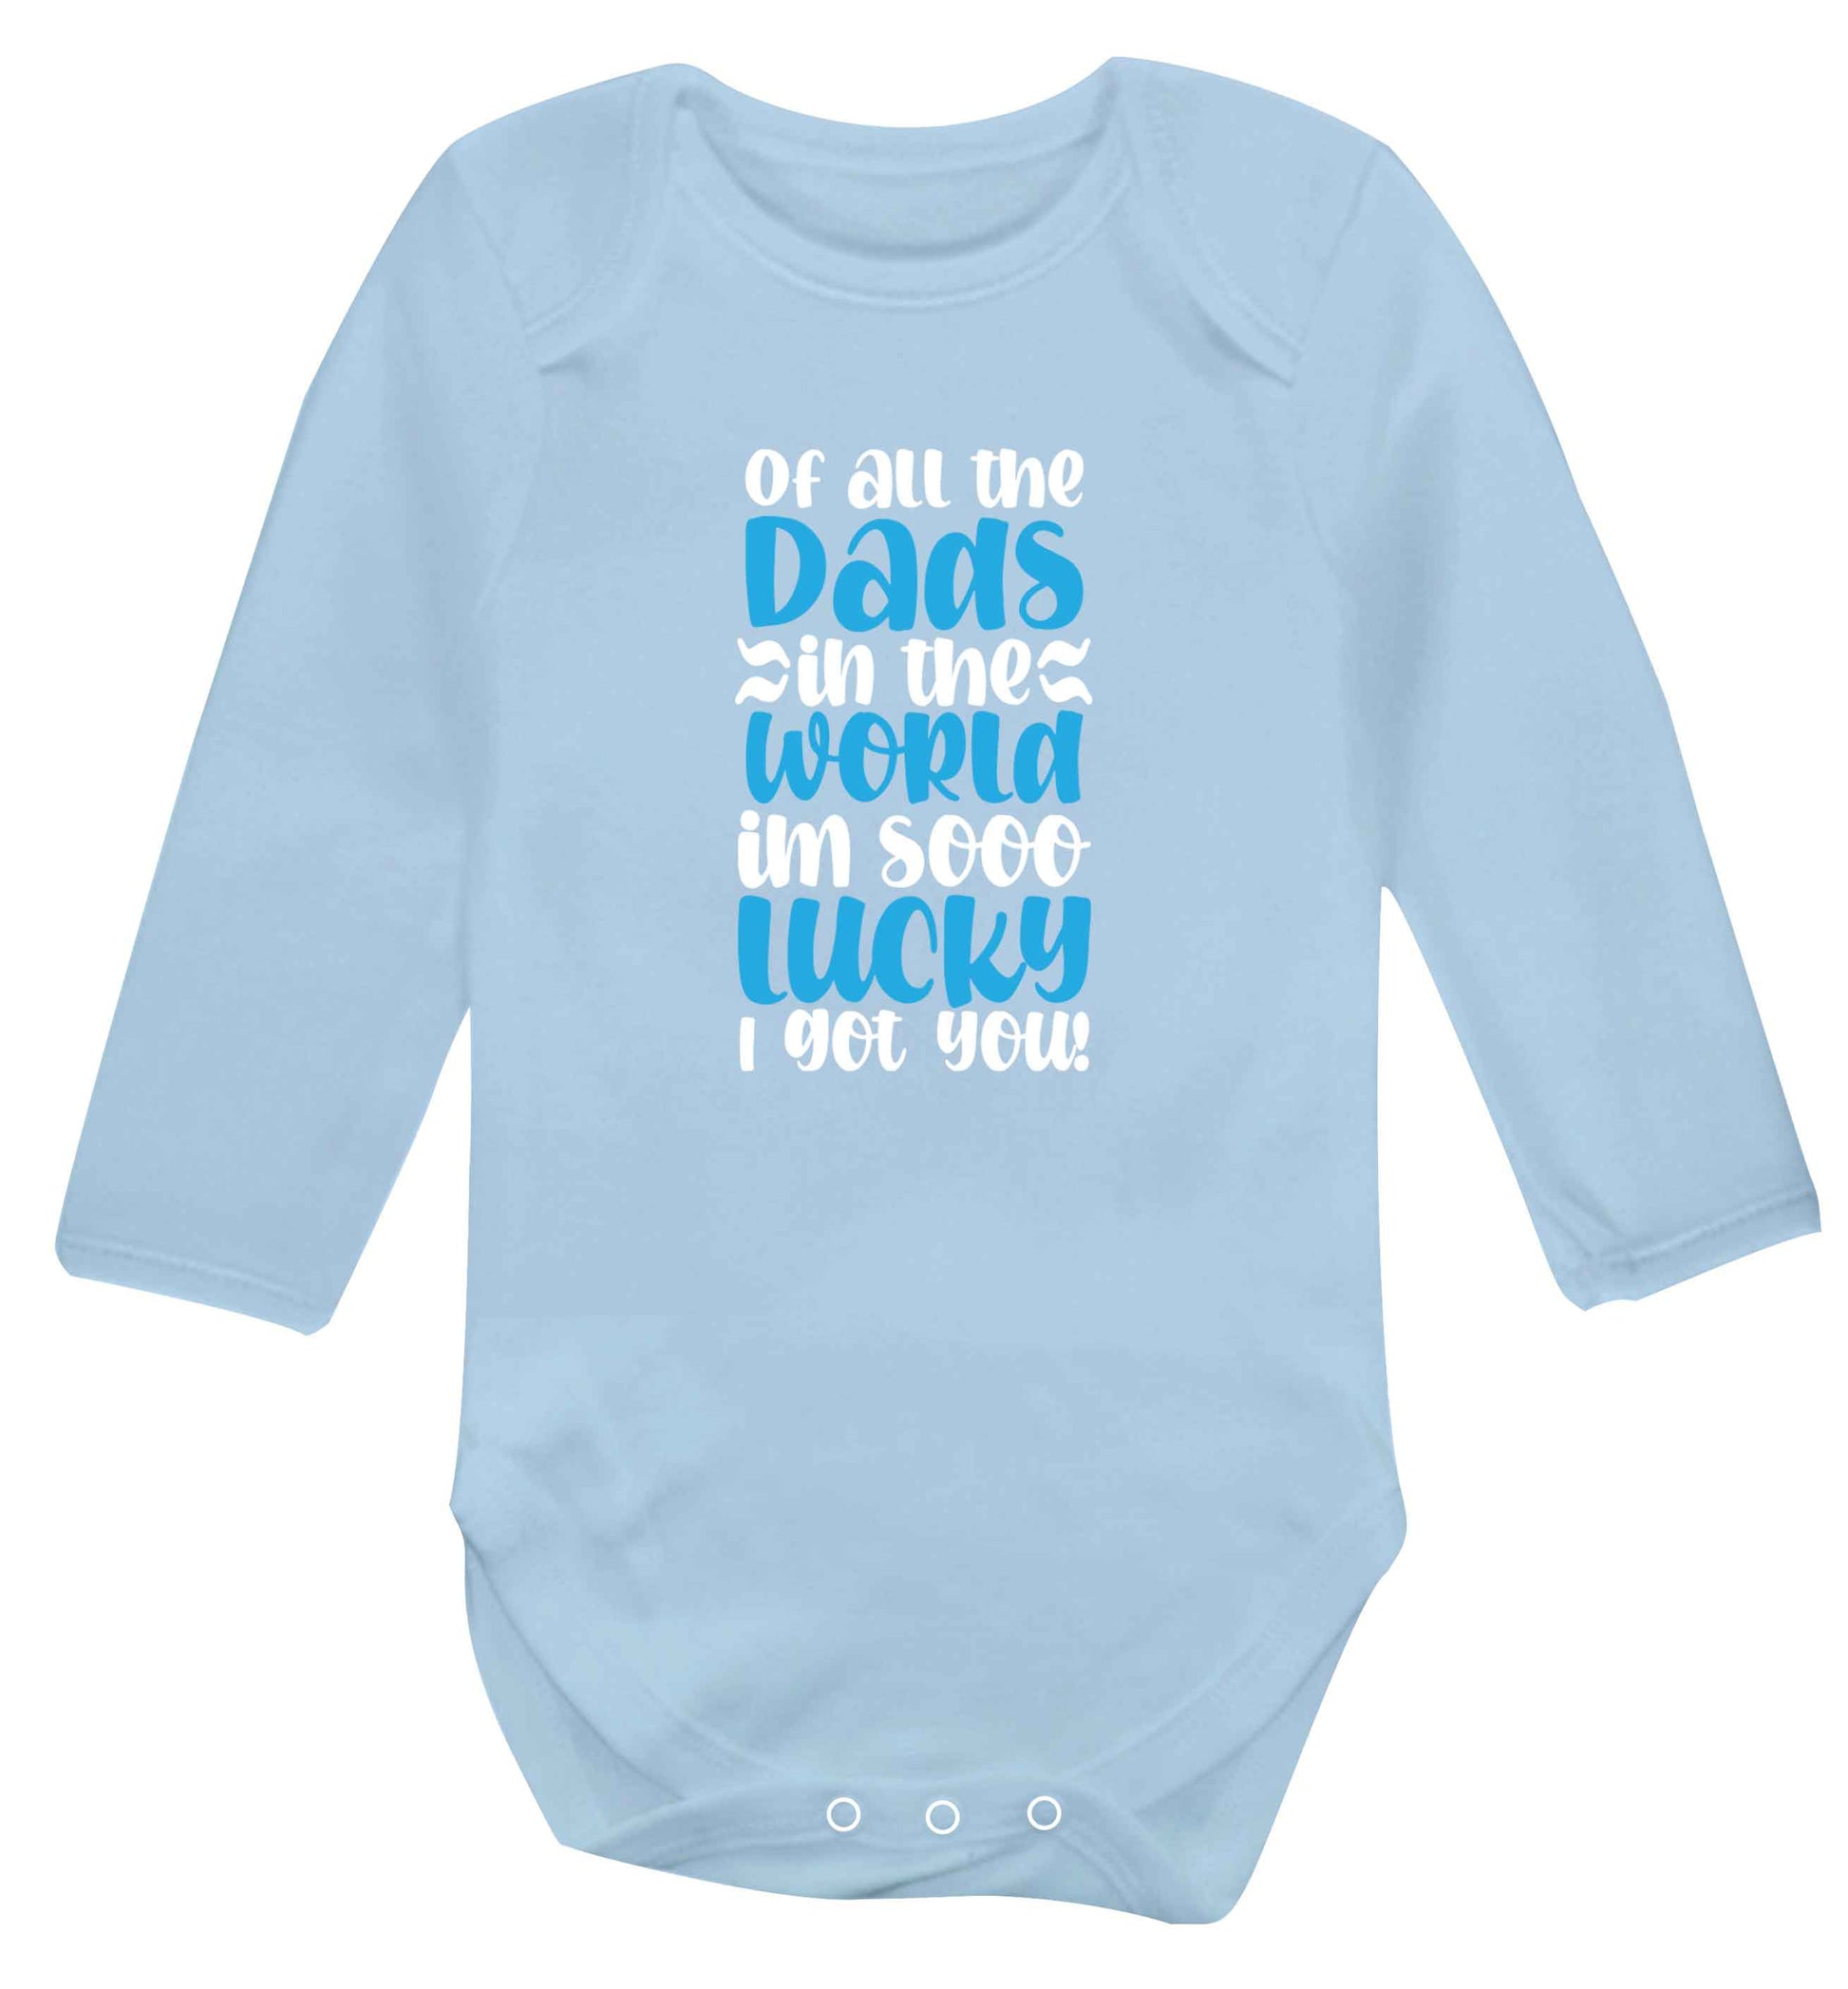 I'm as lucky as can be the worlds greatest dad belongs to me! baby vest long sleeved pale blue 6-12 months